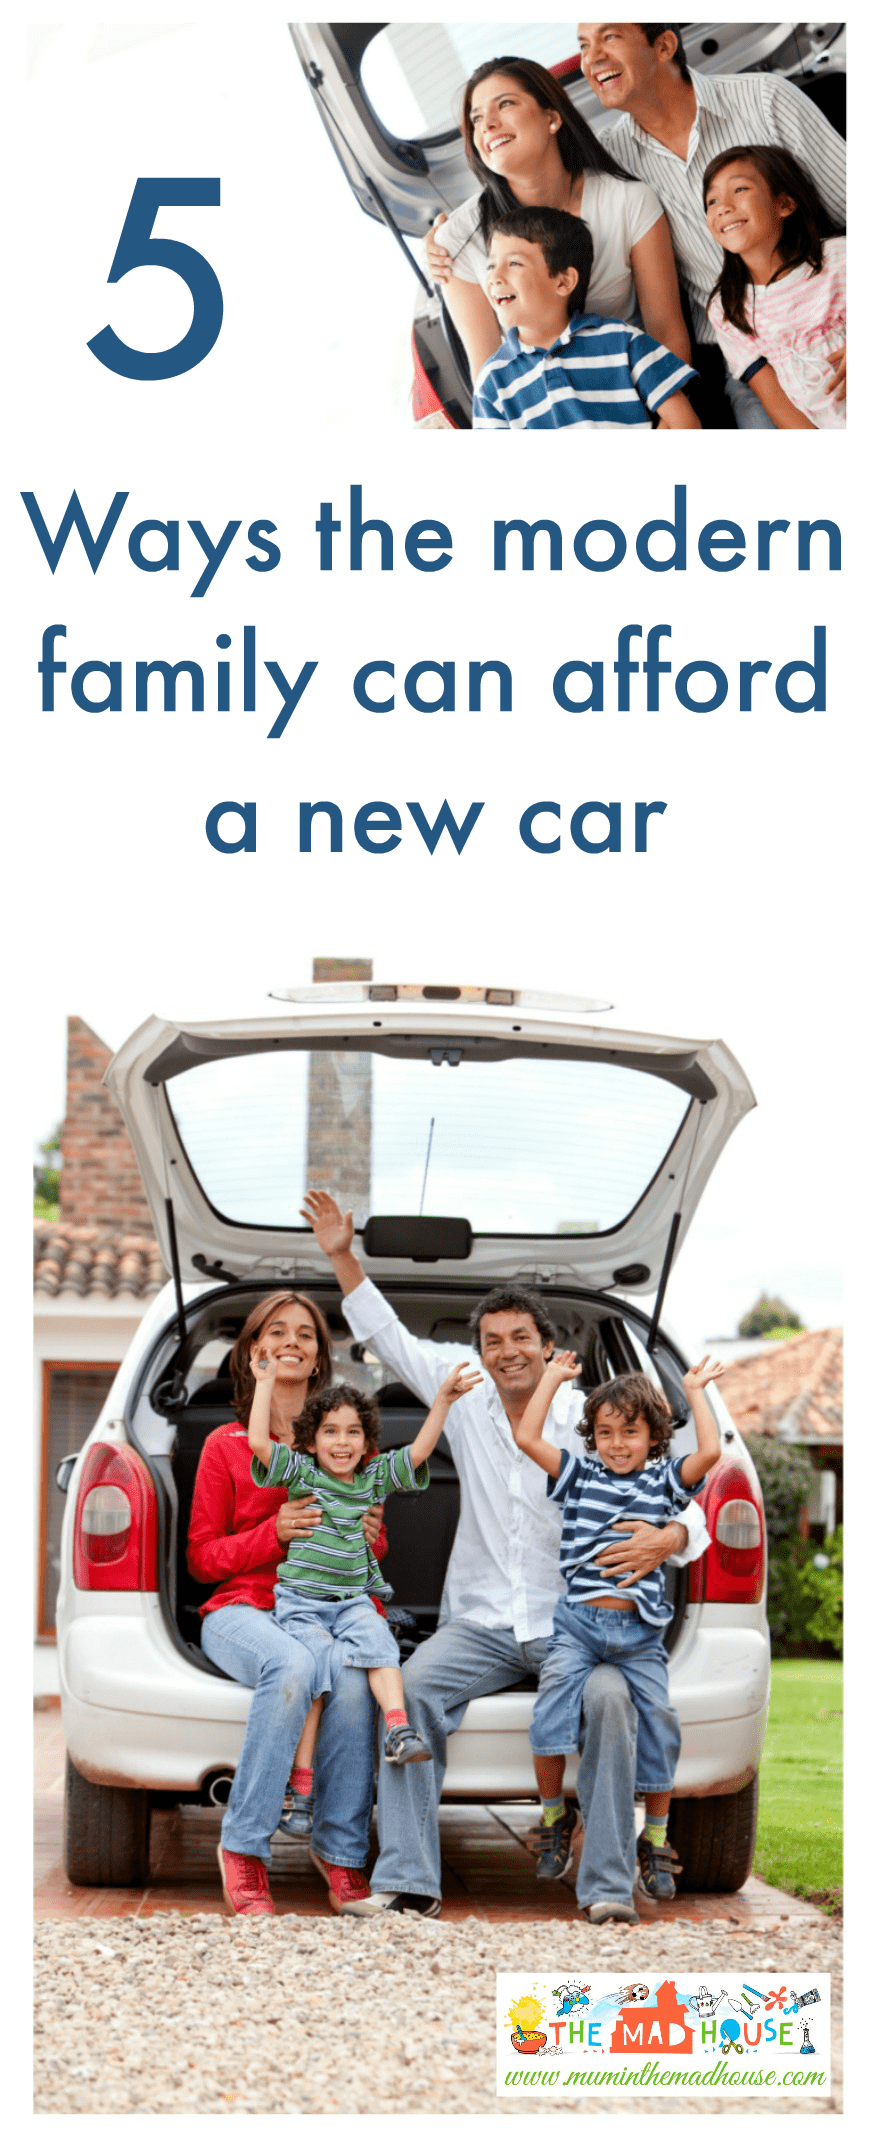 5 Ways the modern family can afford a new car